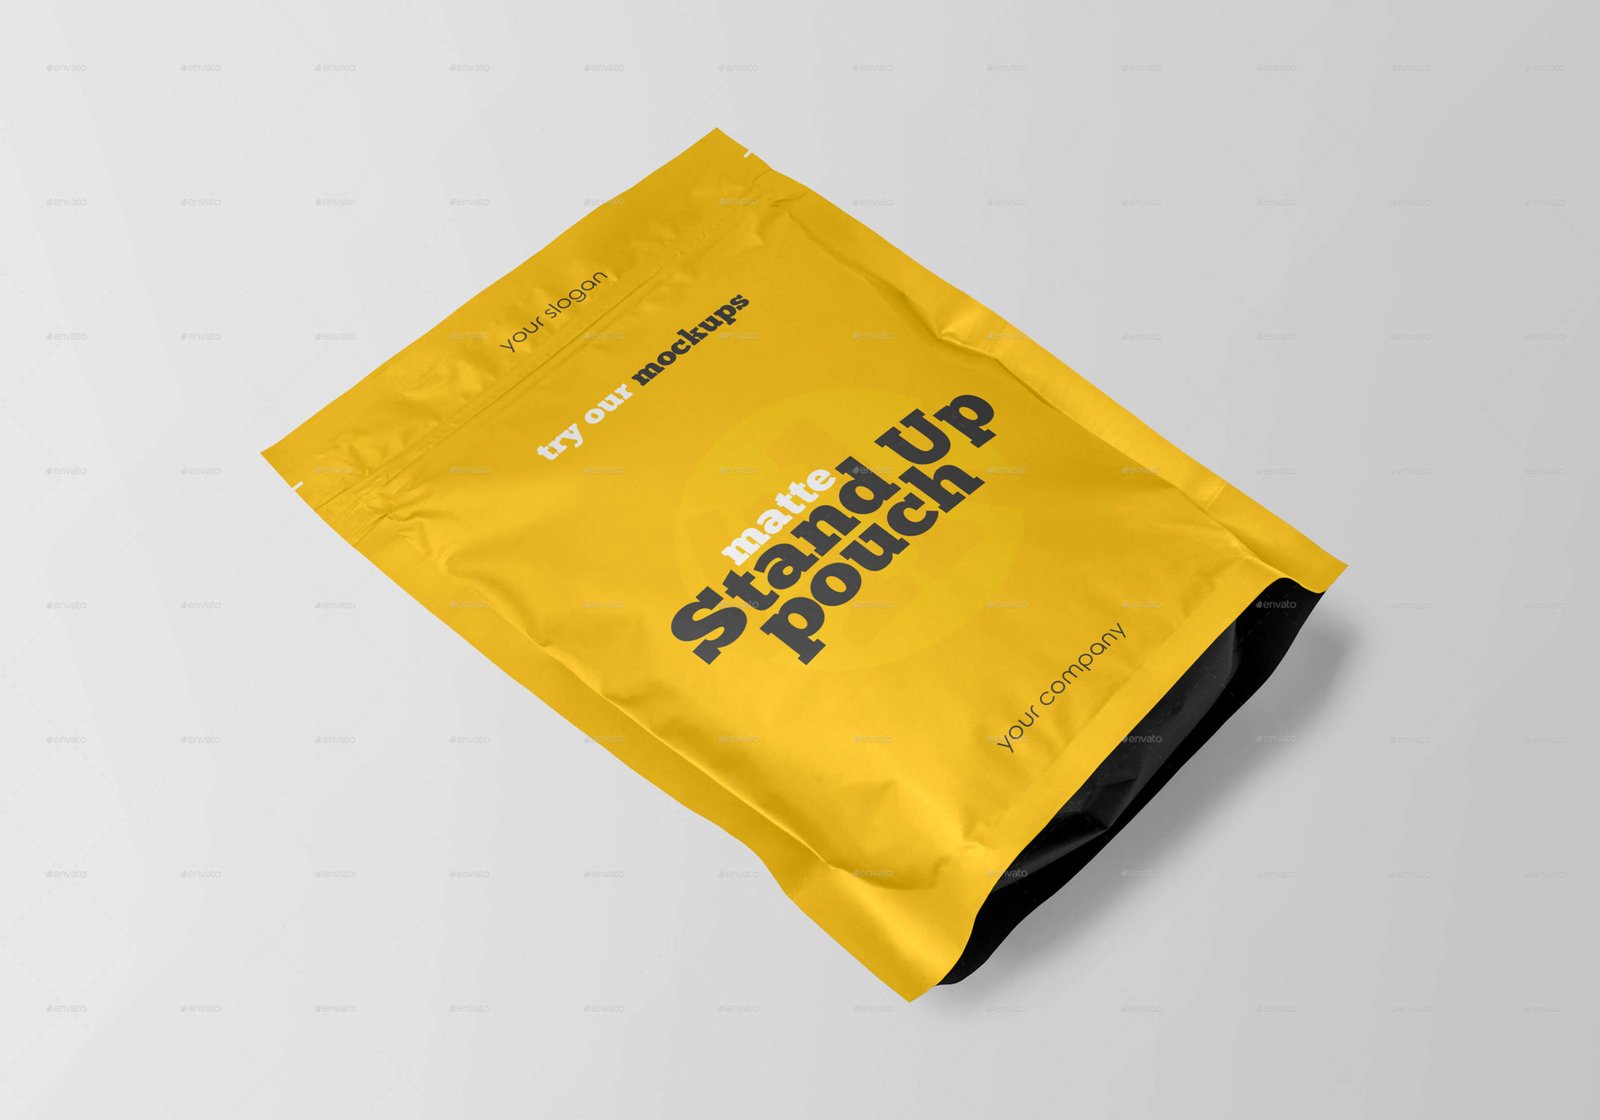 Matte Stand-Up Pouch Mockup Set